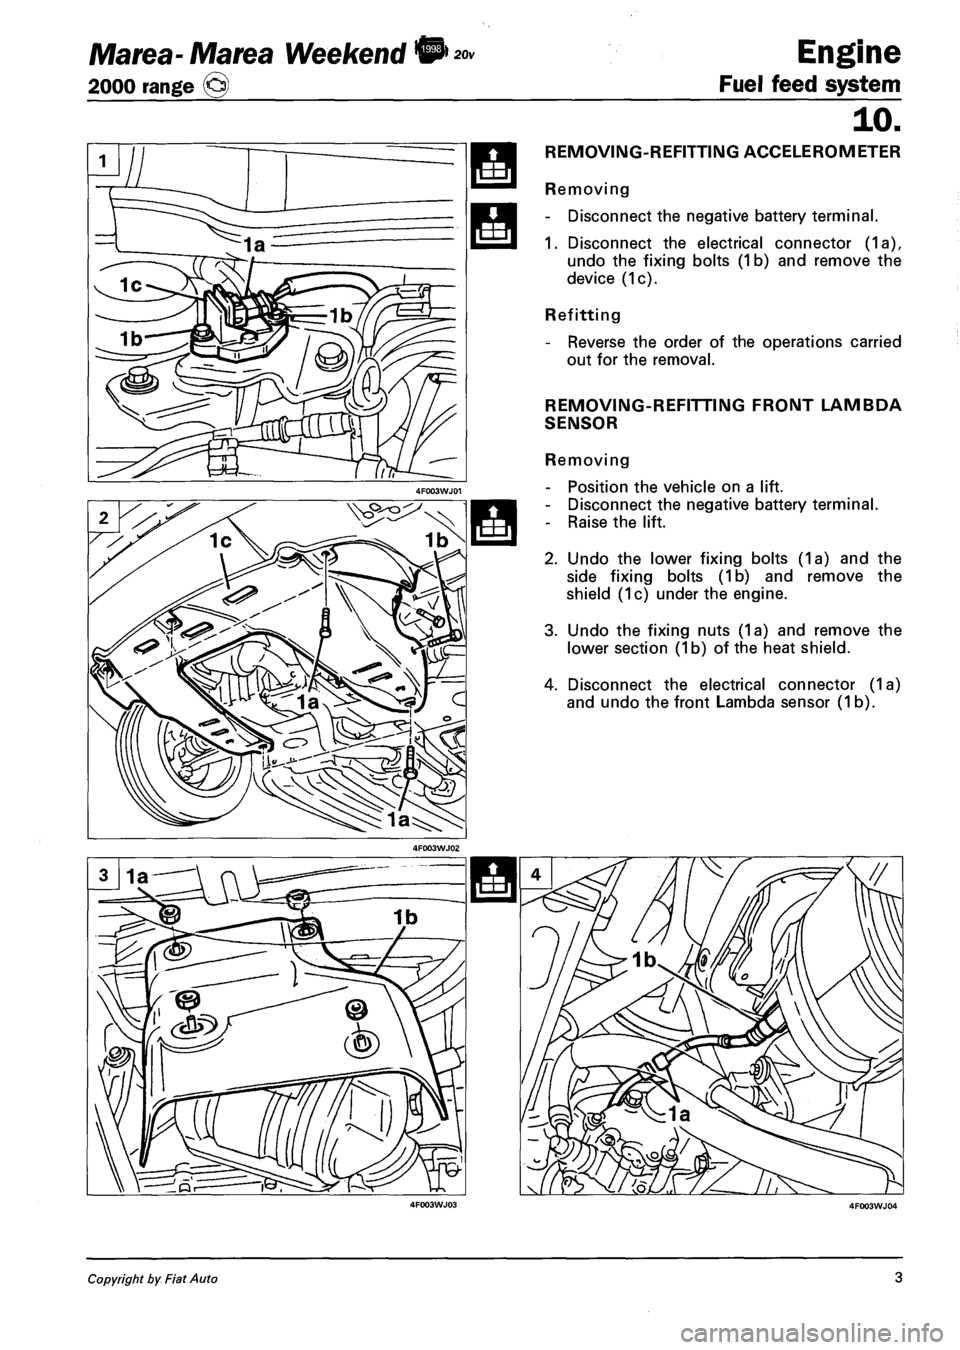 FIAT MAREA 2000 1.G User Guide Marea- Marea Weekend • 
2000 range © 
Engine 
Fuel feed system 
10. 
REMOVING-REFITTING ACCELEROMETER 
Removing 
- Disconnect the negative battery terminal. 
1. Disconnect the electrical connector 